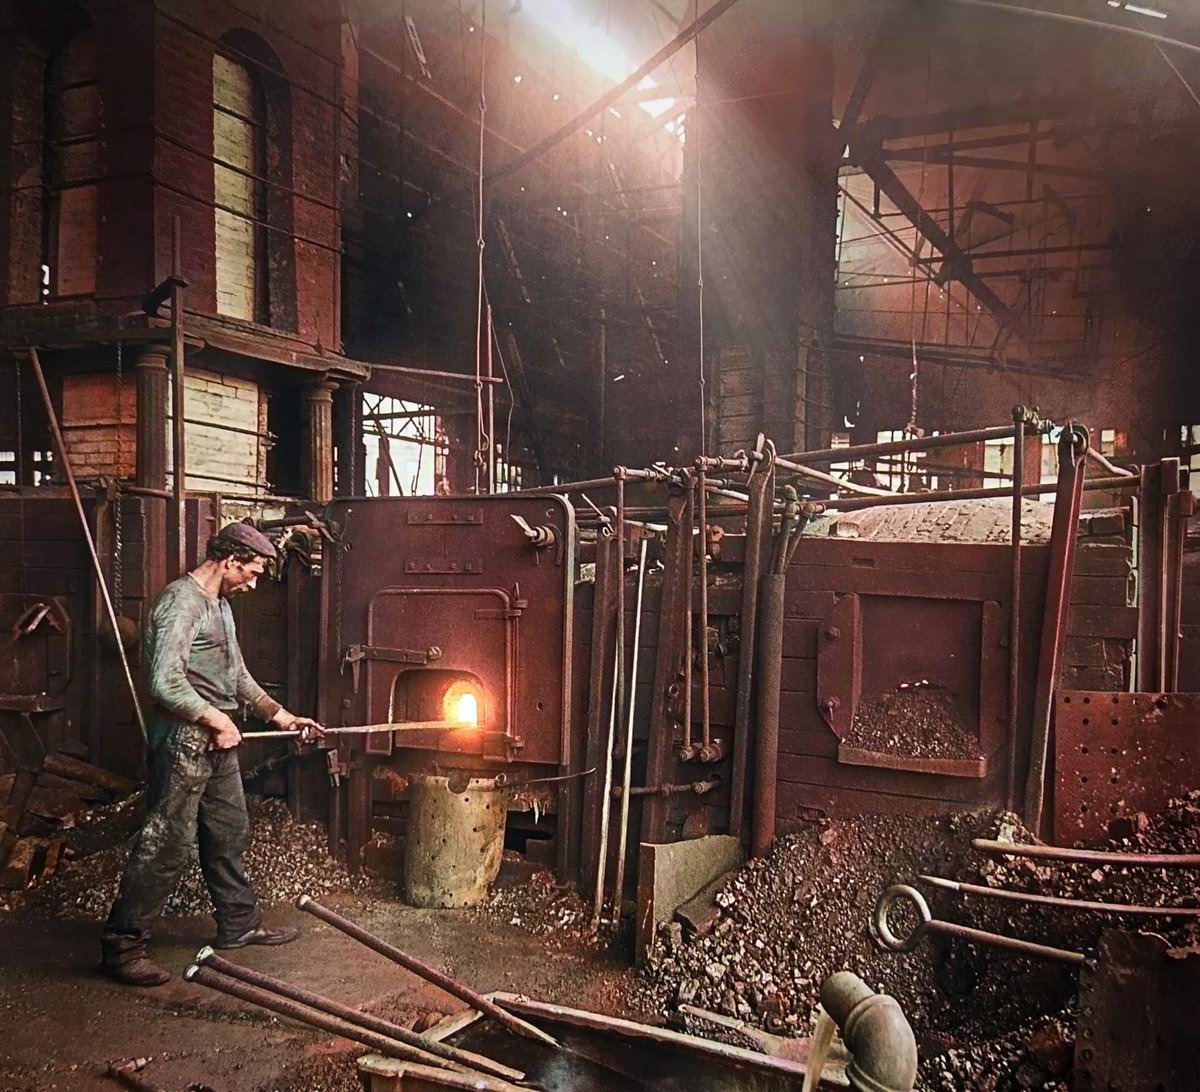 #CohoesNY // 1911

Cohoes Industrial History: Factory Laborer, Cohoes Rolling Mill, 1911. This is such an amazing image, and I love the restoration. 

Captured in 1911, this image showcases labor at a puddling furnace in the Cohoes Rolling Mill. Situated opposite the Star Woolen…